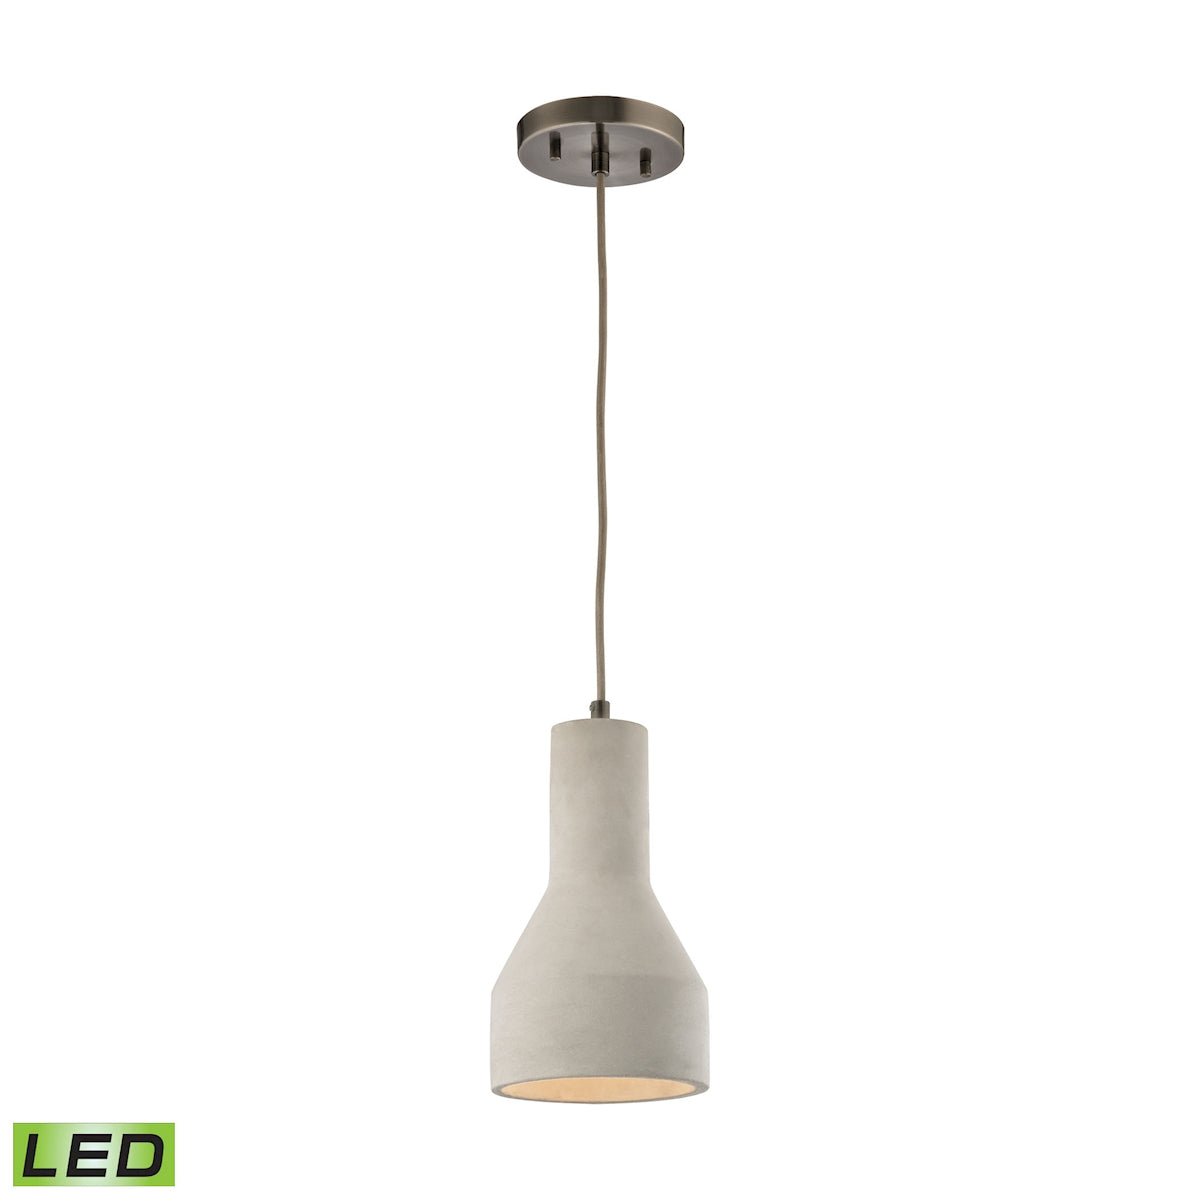 ELK Lighting 45331/1-LED Urban Form 1-Light Mini Pendant in Black Nickel with Natural Concrete Shade - Includes LED Bulb